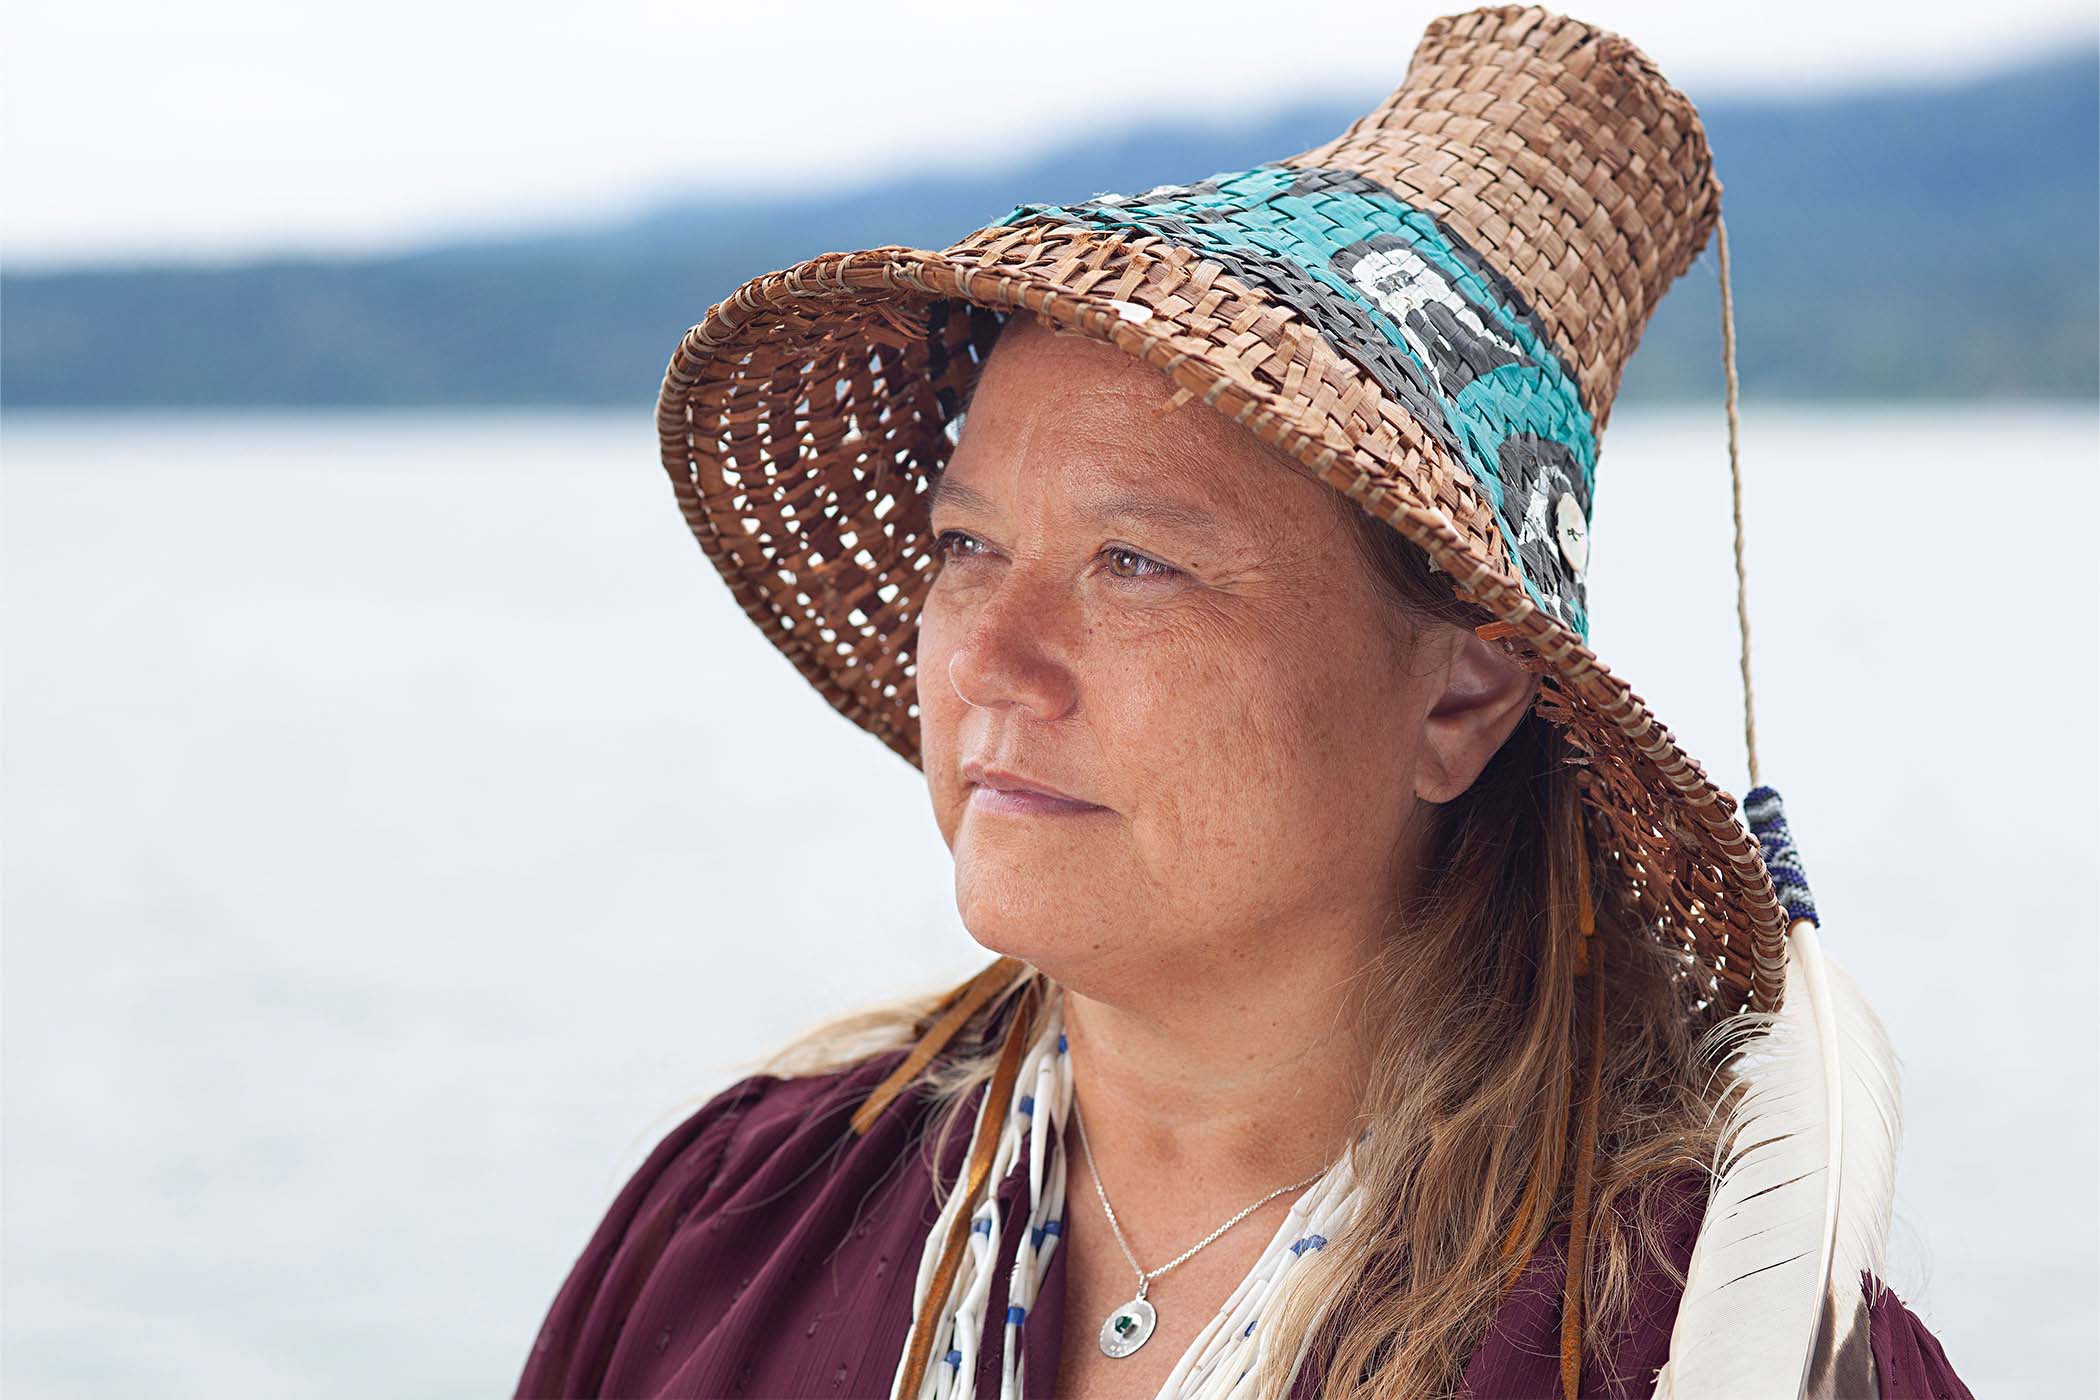 Fawn Sharp wearing a straw hat and maroon top gazes towards the left with serene expression. In the background, out of focus, is a view of a lake and mountains.